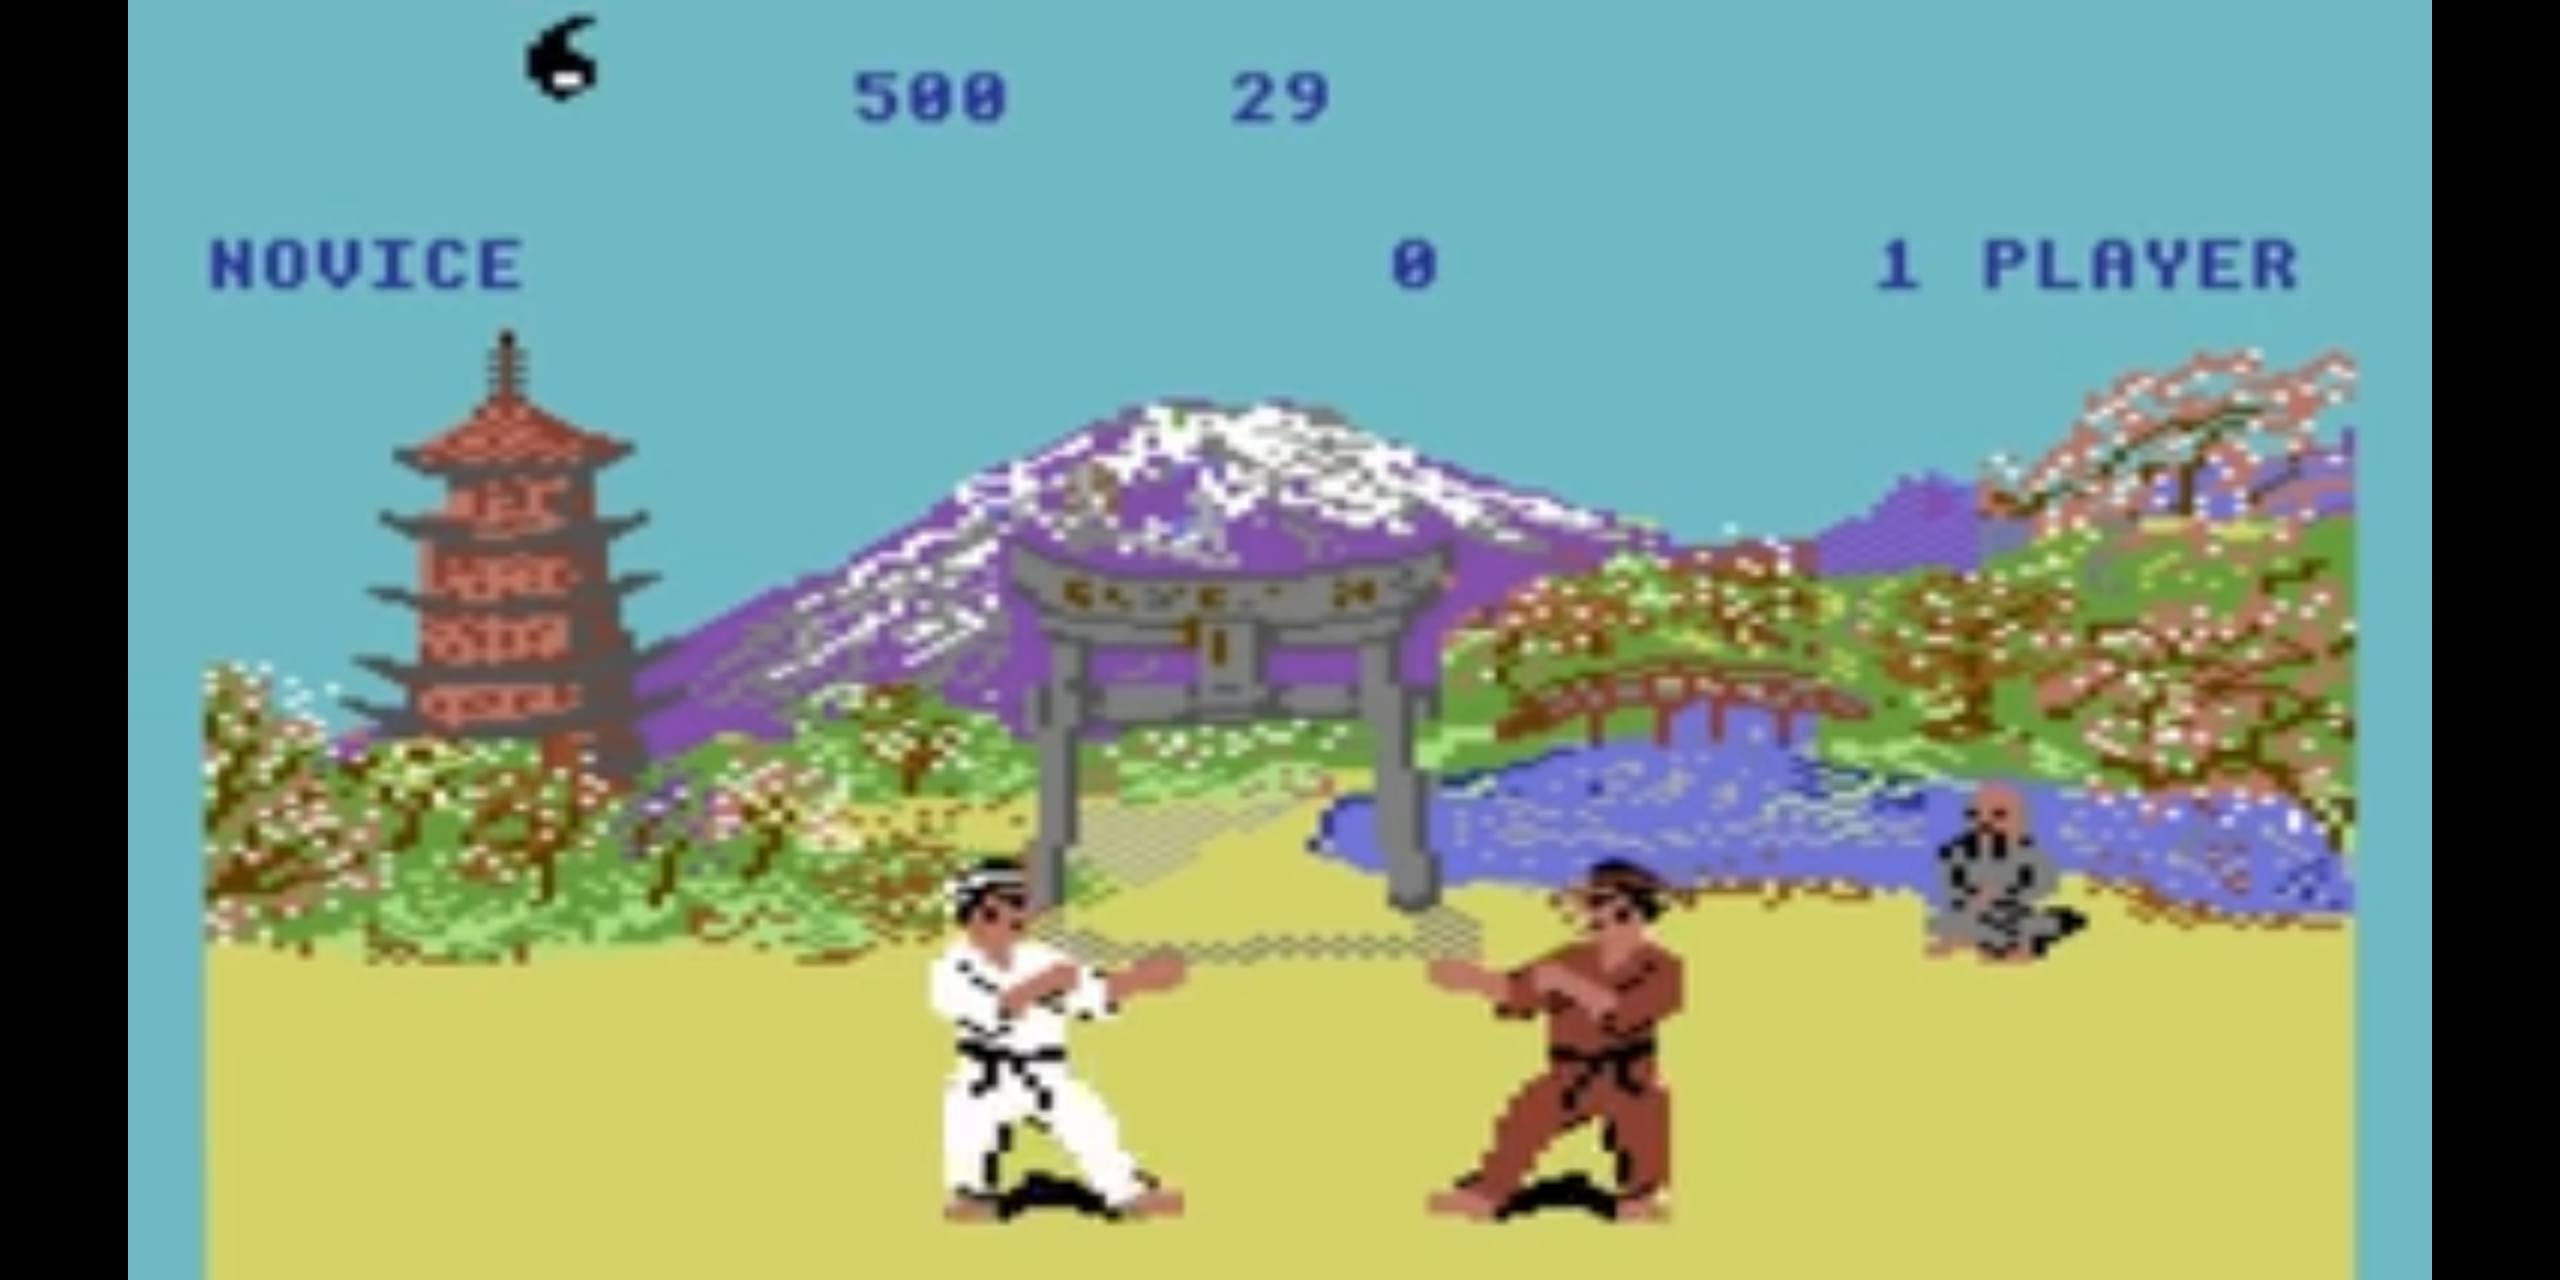 2 Characters in Exploding Fist fighting